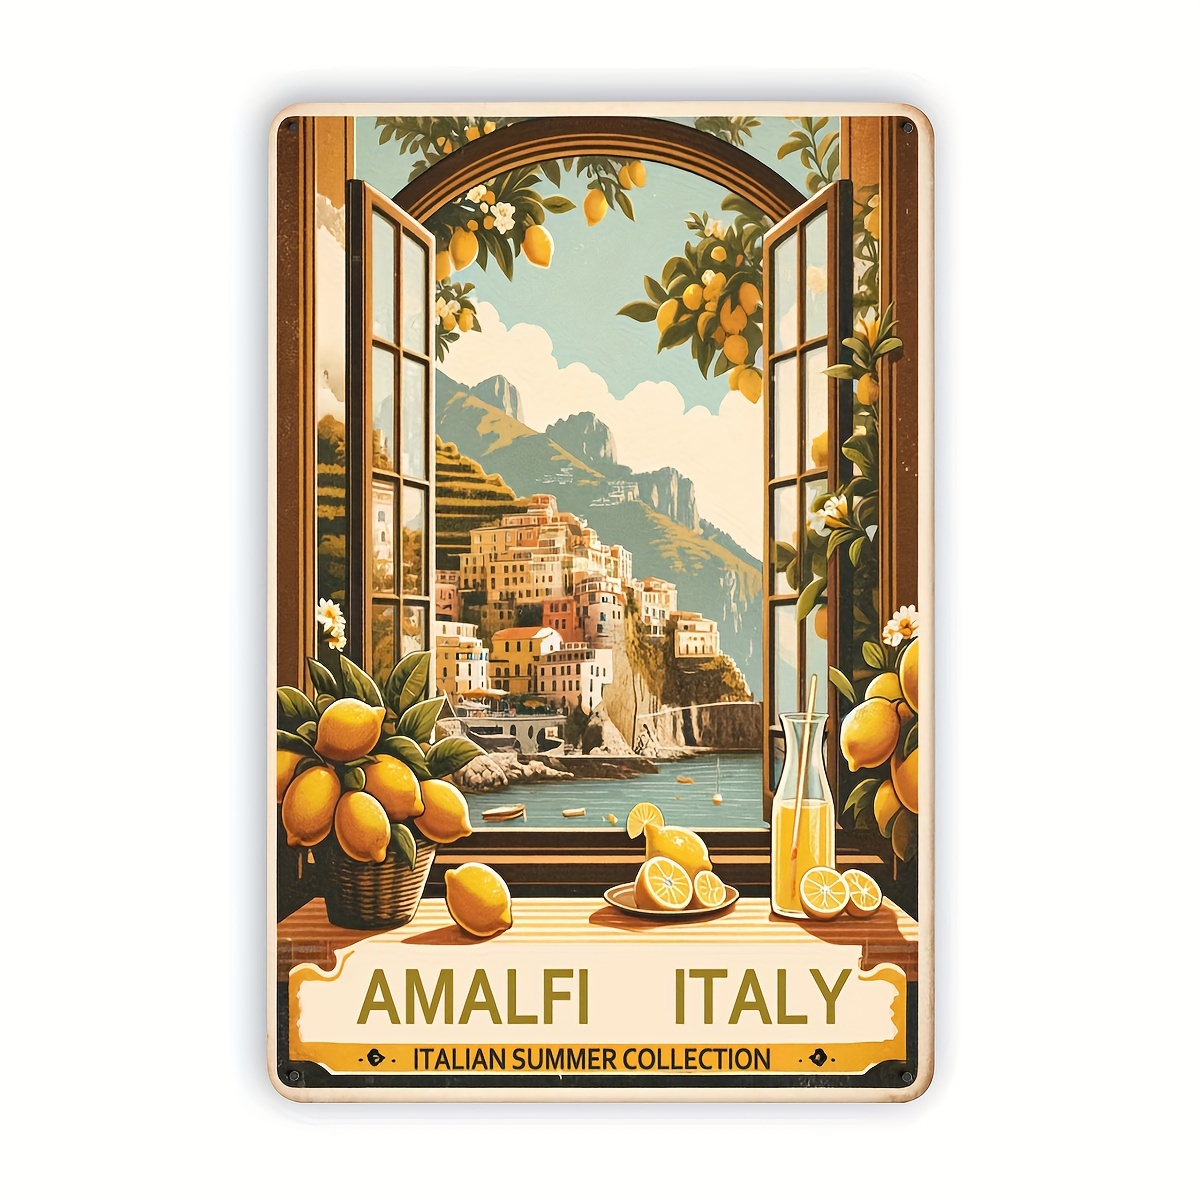 

Amalfi Italy Collection - Stylish Metal Tin Sign For Home, Kitchen, Bar, Or Garage Decor | Waterproof & Dustproof, 8x12 Inches